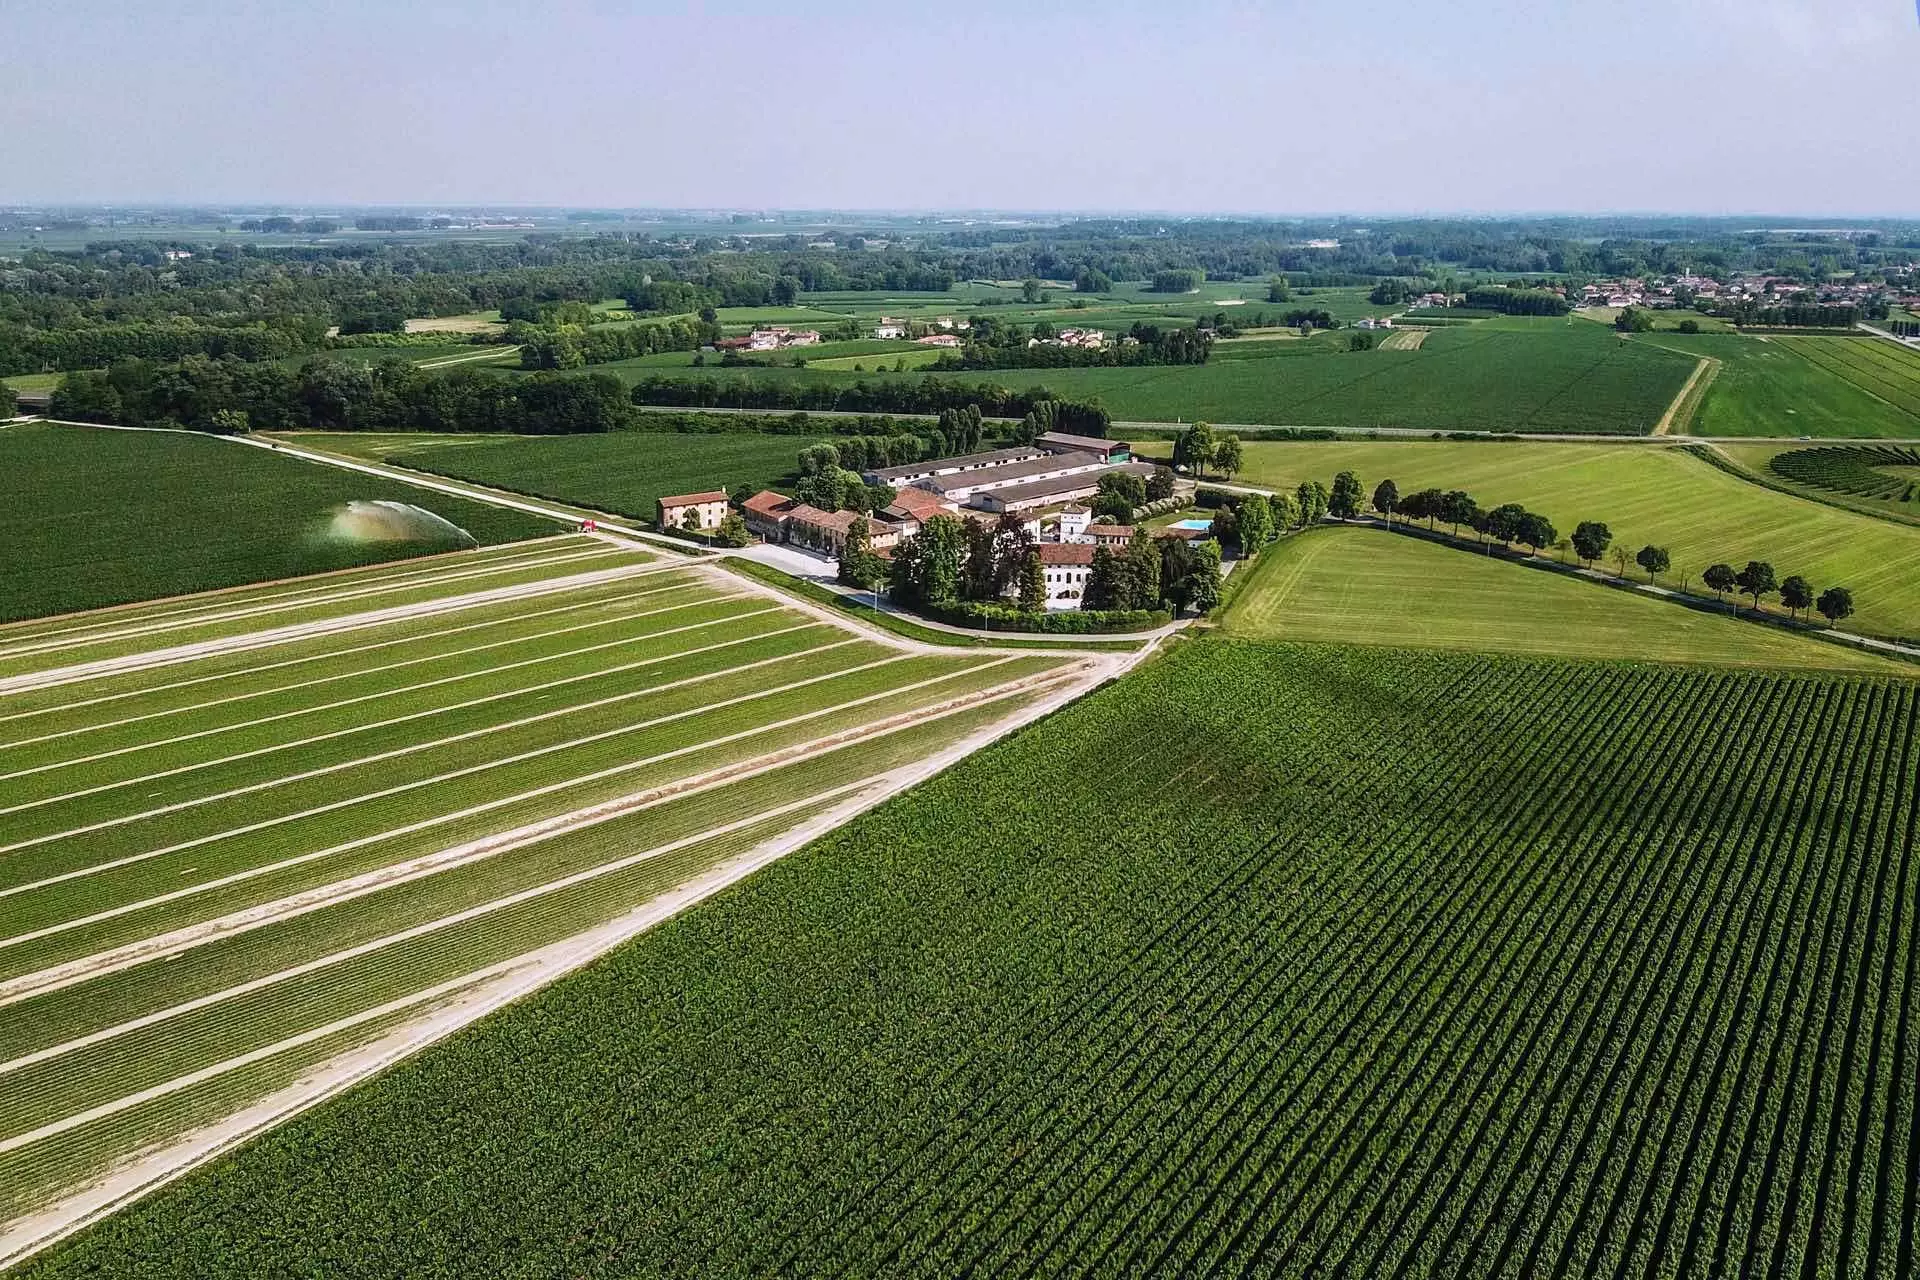 The vineyard sits on a whopping 266.9 acres of land (